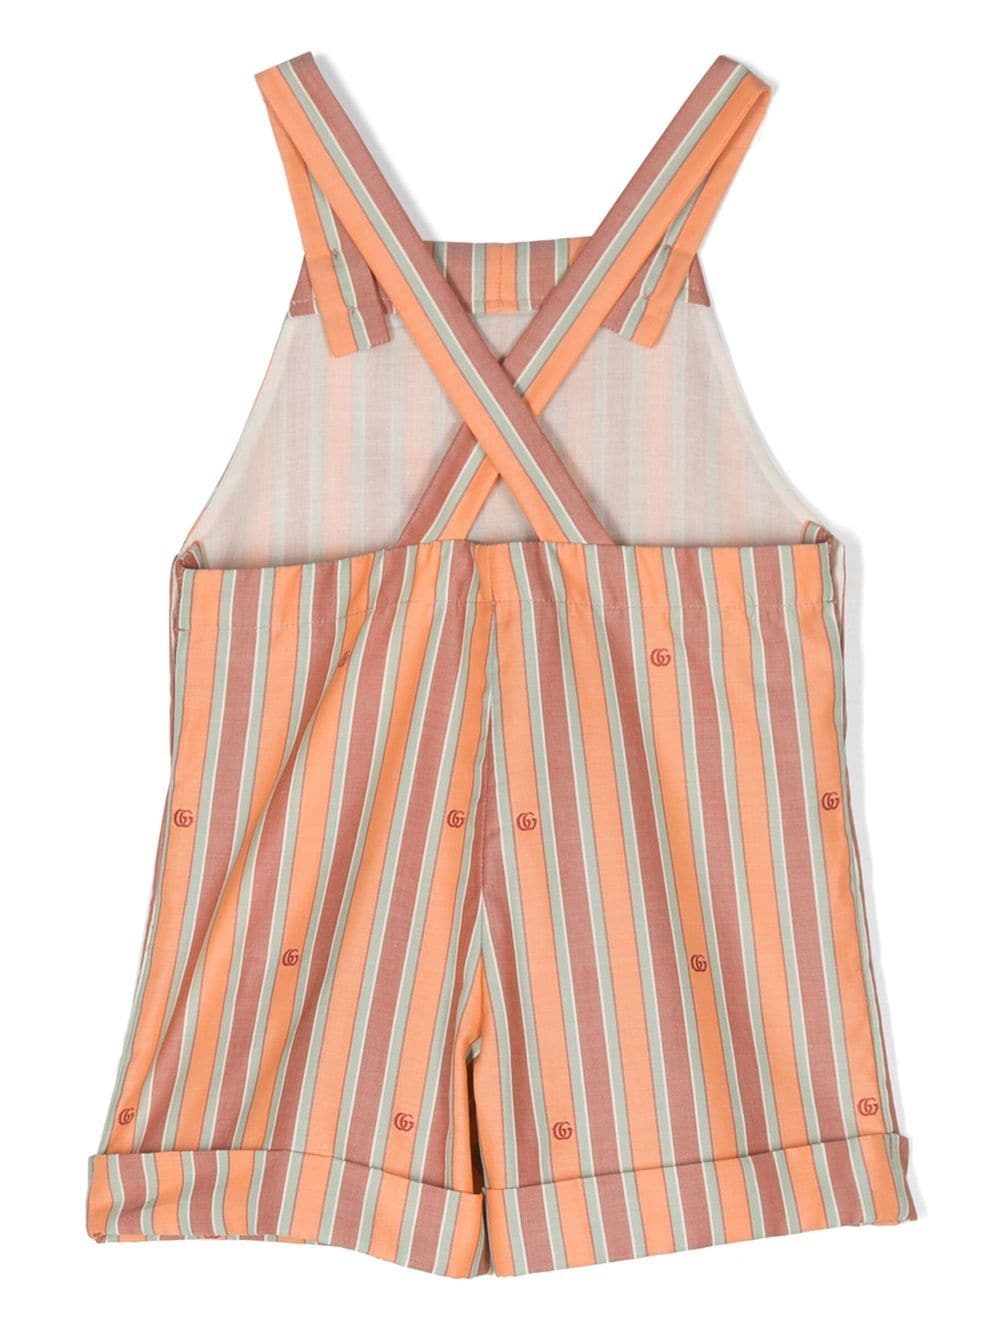 Orange dungarees for baby girls with logo